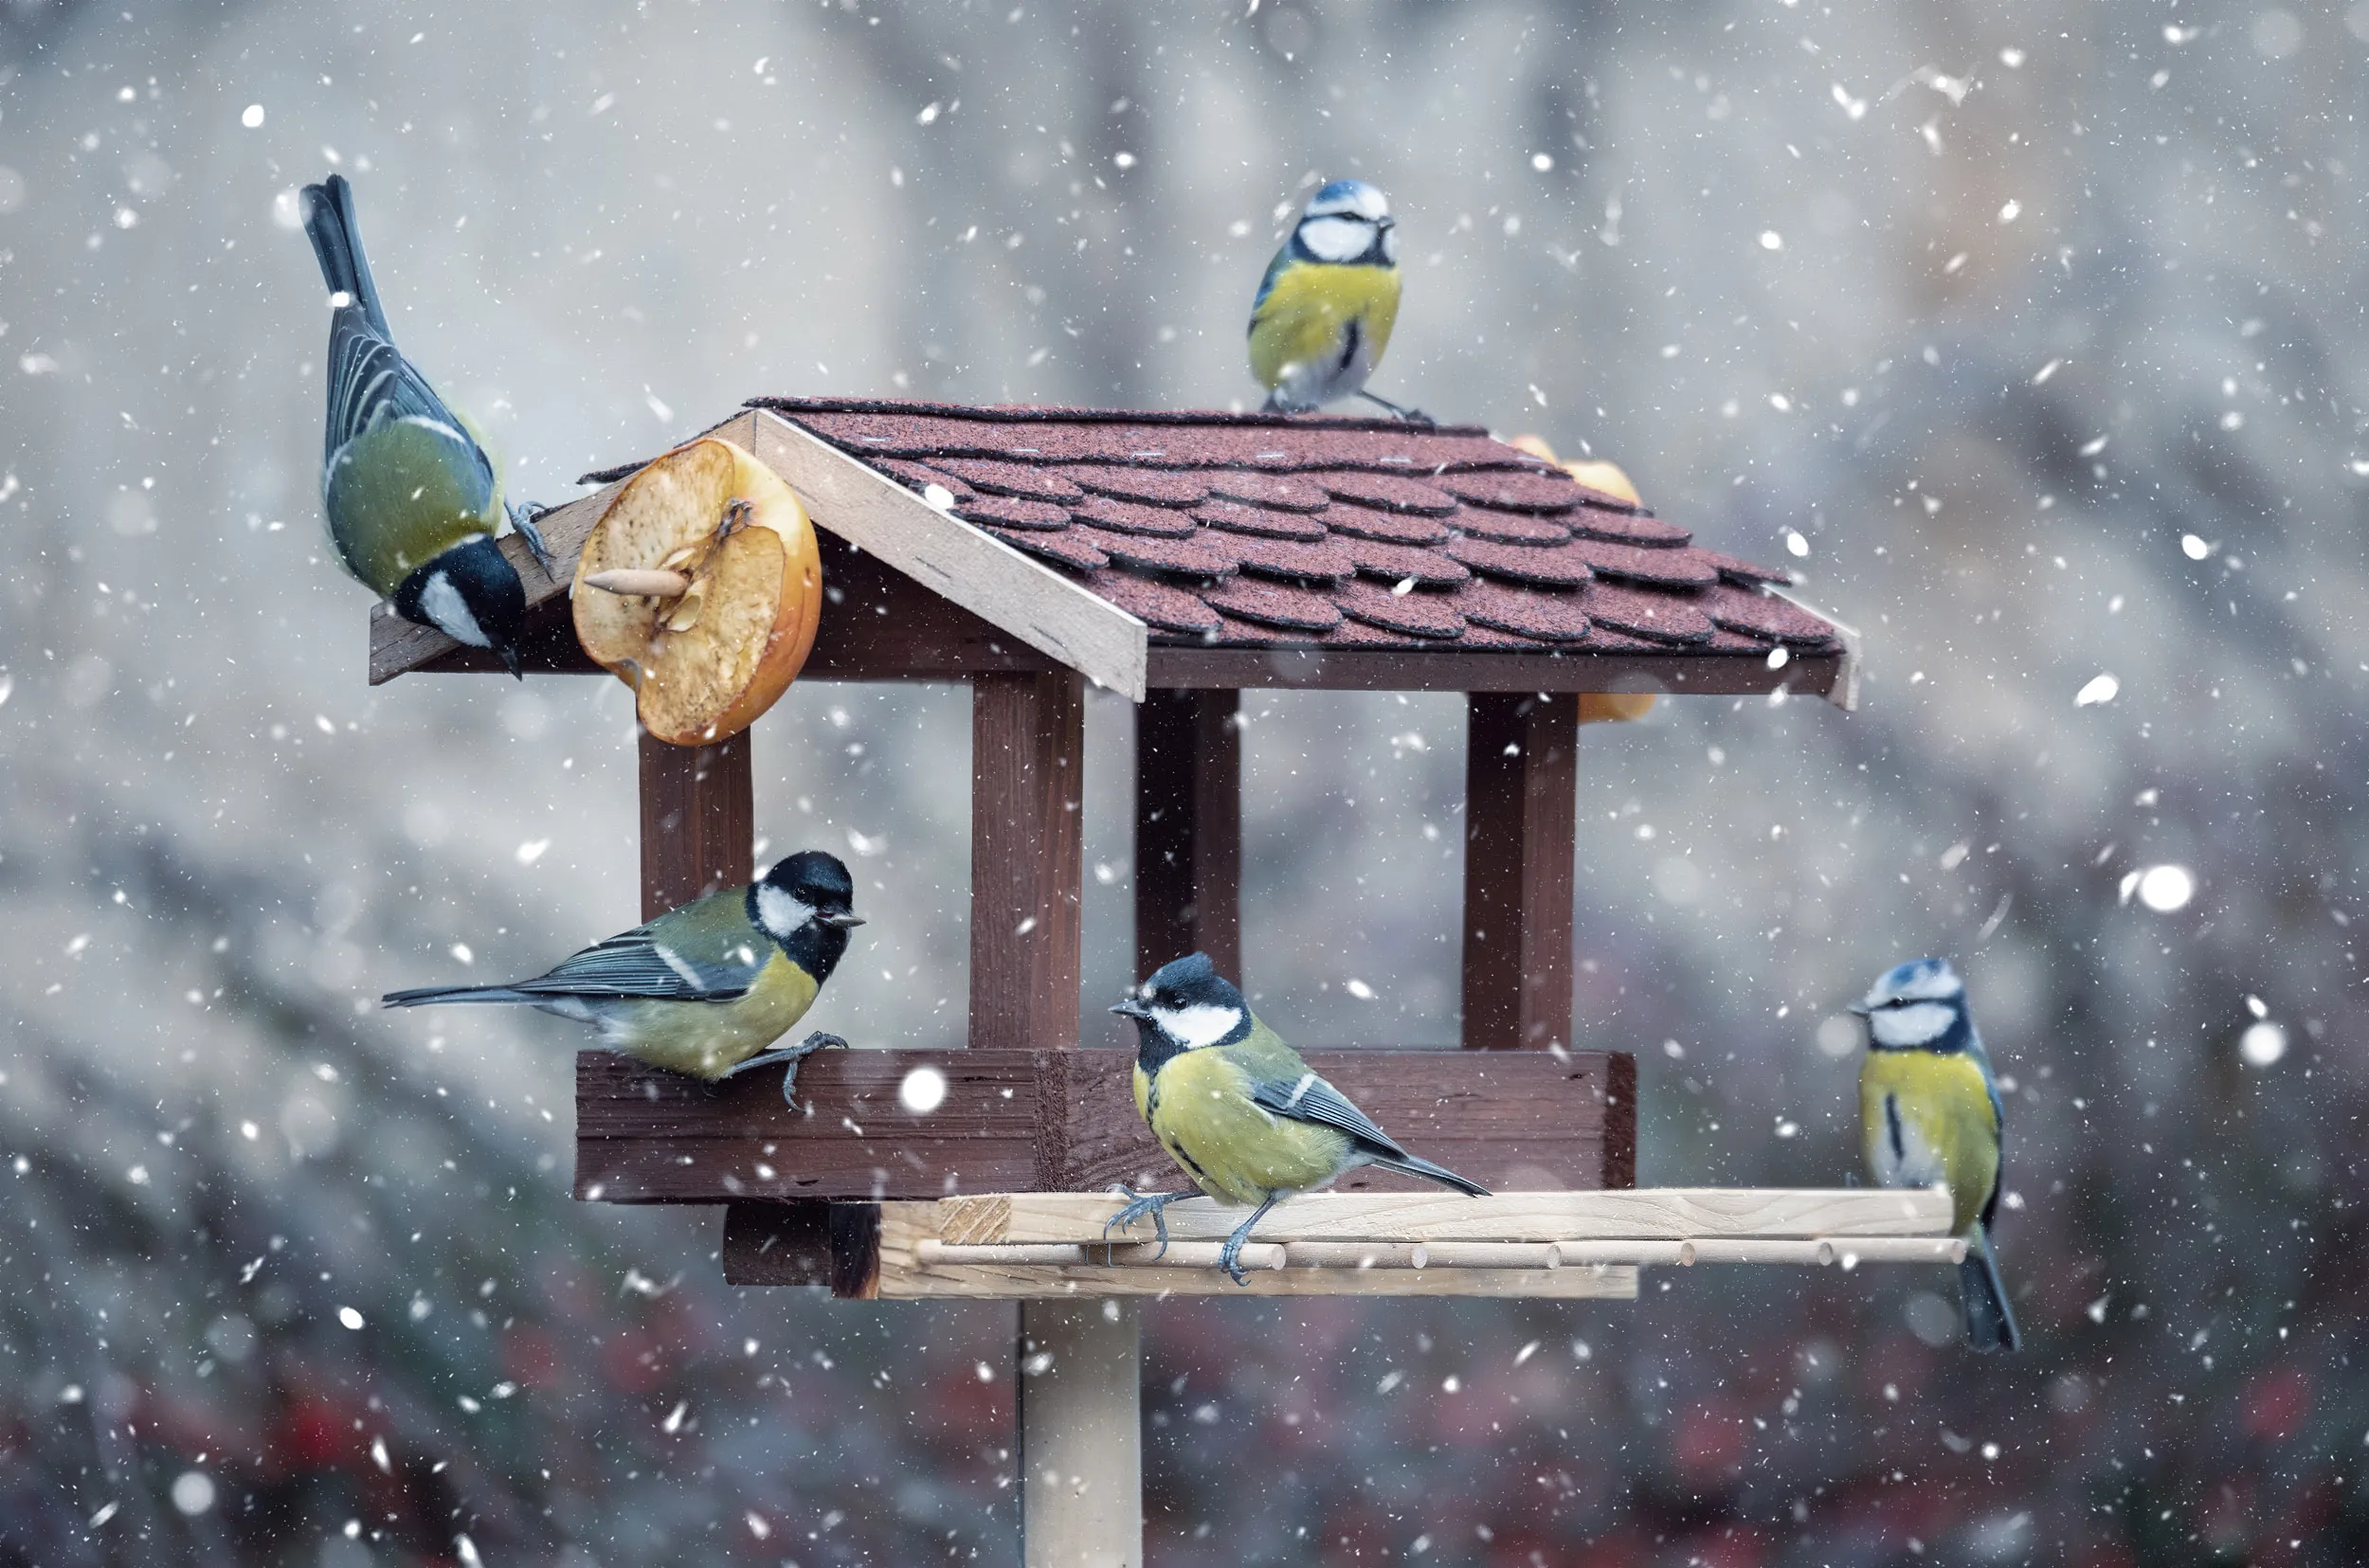 A group of Great and Blue Tits perched on a wooden bird table in winter snow.